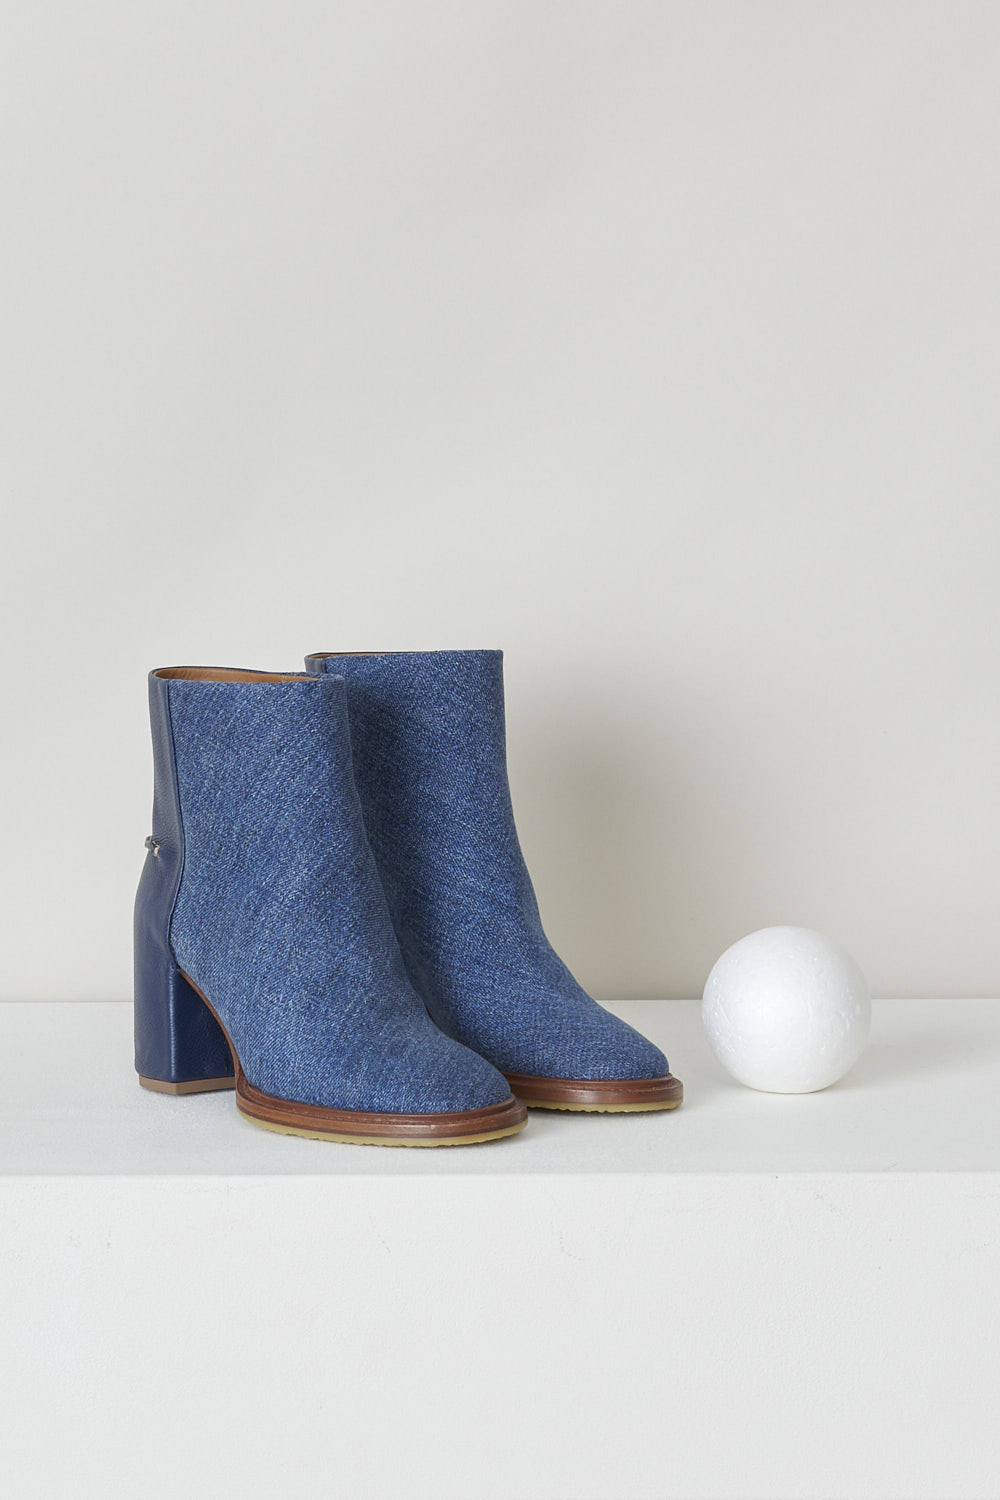 CHLOÃ‰, NAVY BLUE DENIM ANKLE BOOTS, CHC22S521X145C, Blue, Front, These dark navy denim slip-on ankle boots have a blue leather-clad block heel with white stitching on the ankle. The boots have a round toe and a contrasting brown sole. 

